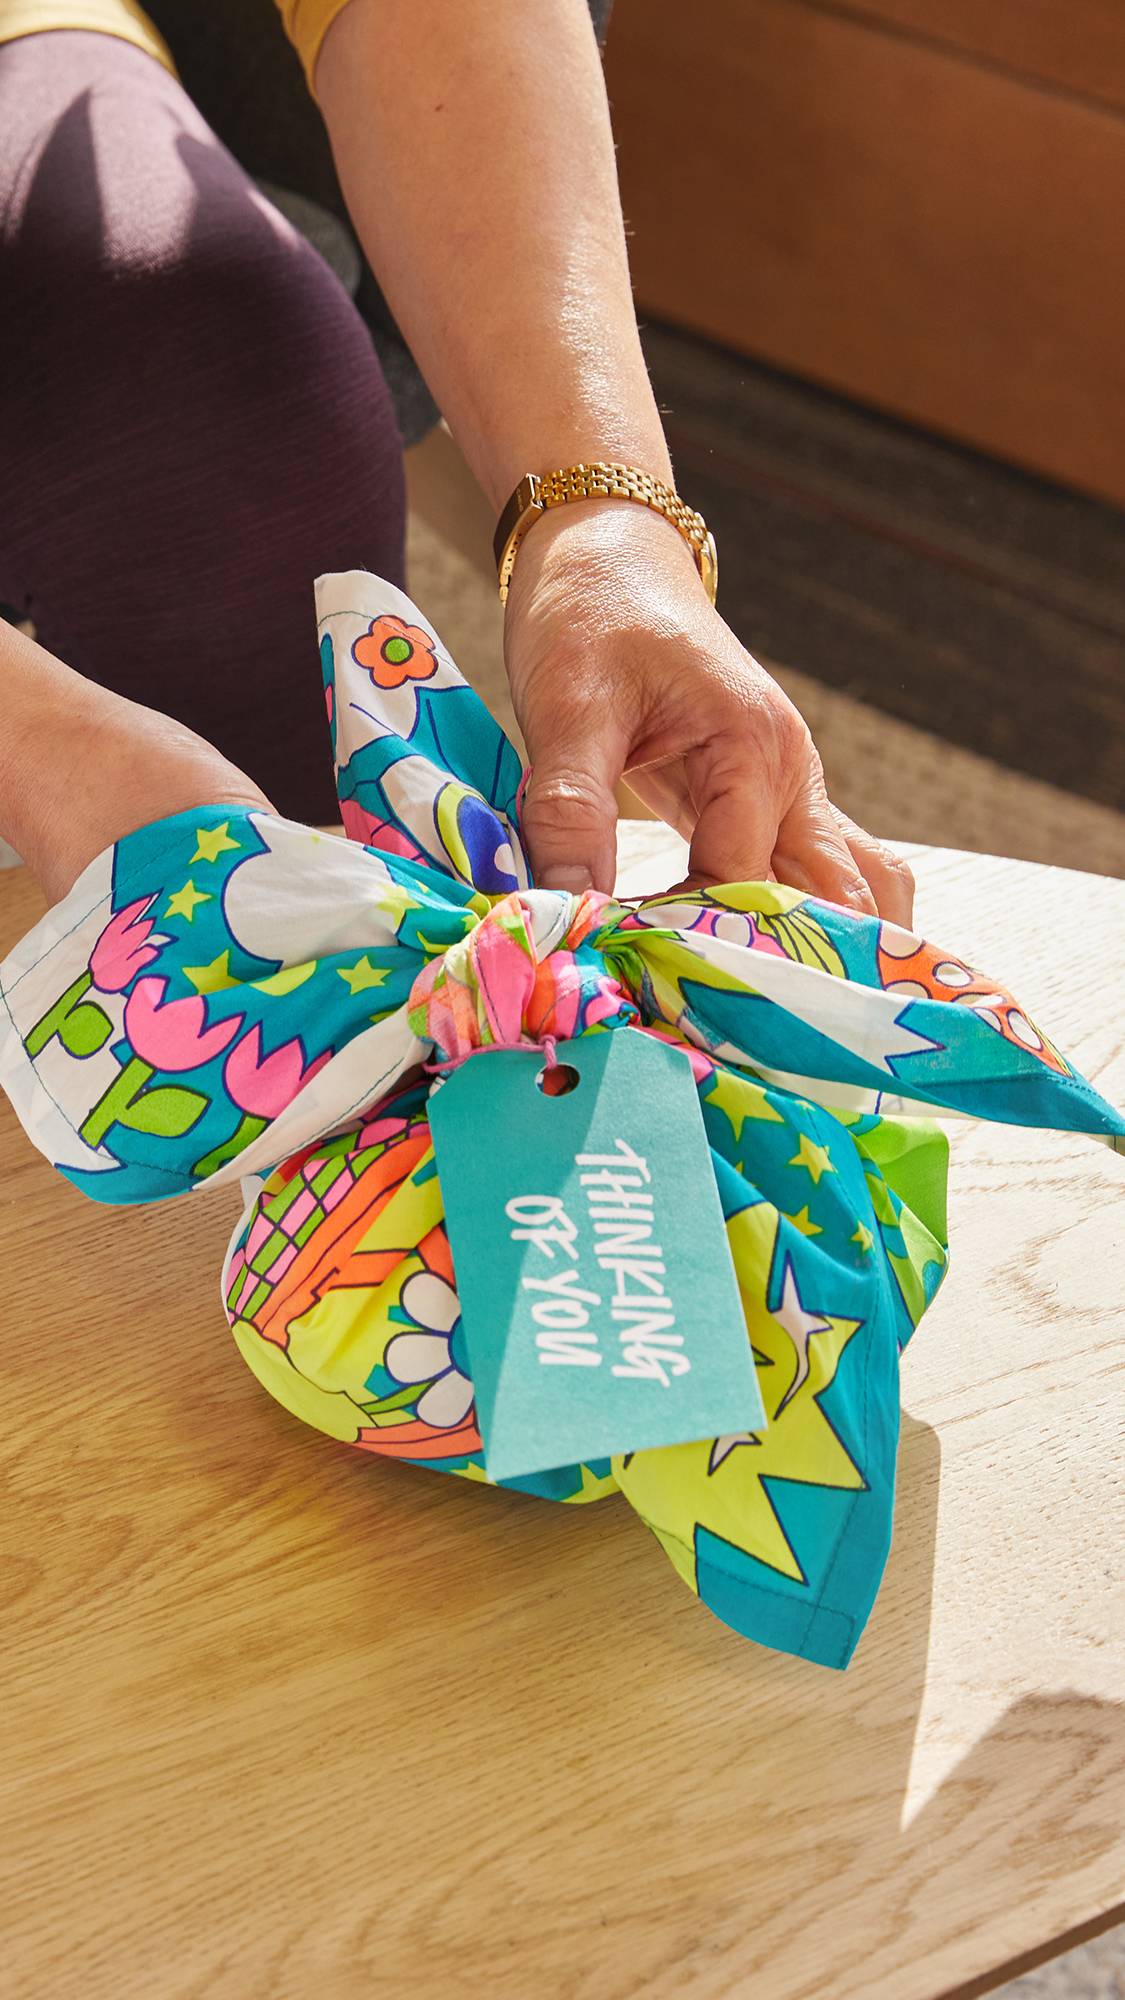 The image shows the model attaching the written gift tag to the neatly wrapped Joyous Springtime knot wrap and gift. 